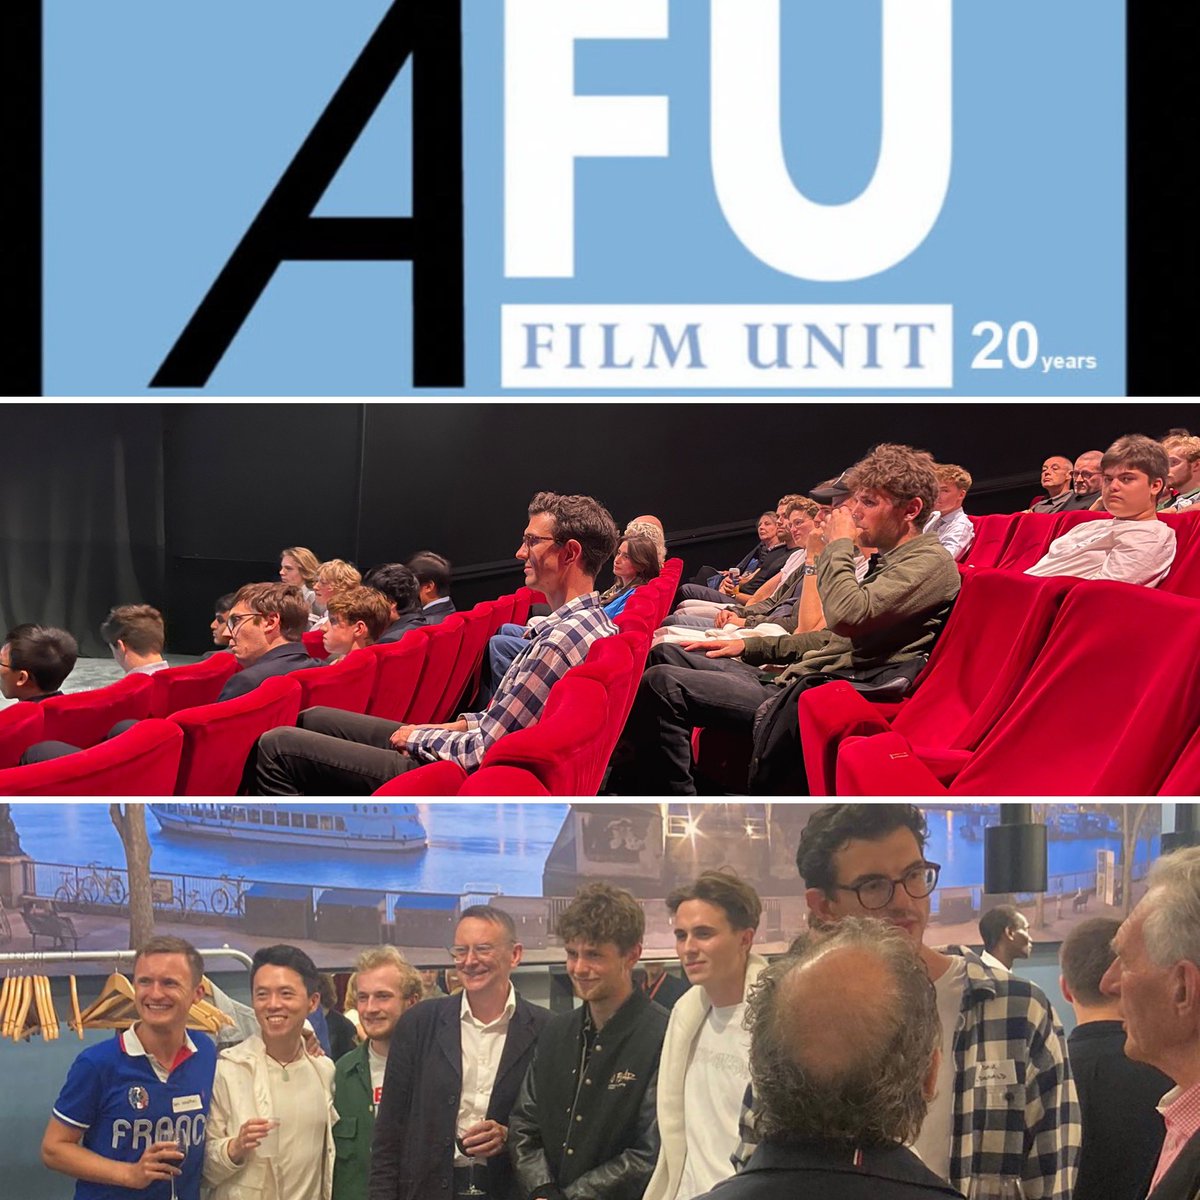 That was one of the great days. Thanks to everyone who came to @BFI yesterday to mark 20 years of @AbingdonFilm Wonderful to see so many current & former members of the AFU at what was a joyous & uplifting occasion. Thanks @markreid1895 @benugo @larkmeadschool @Abingdon_Head